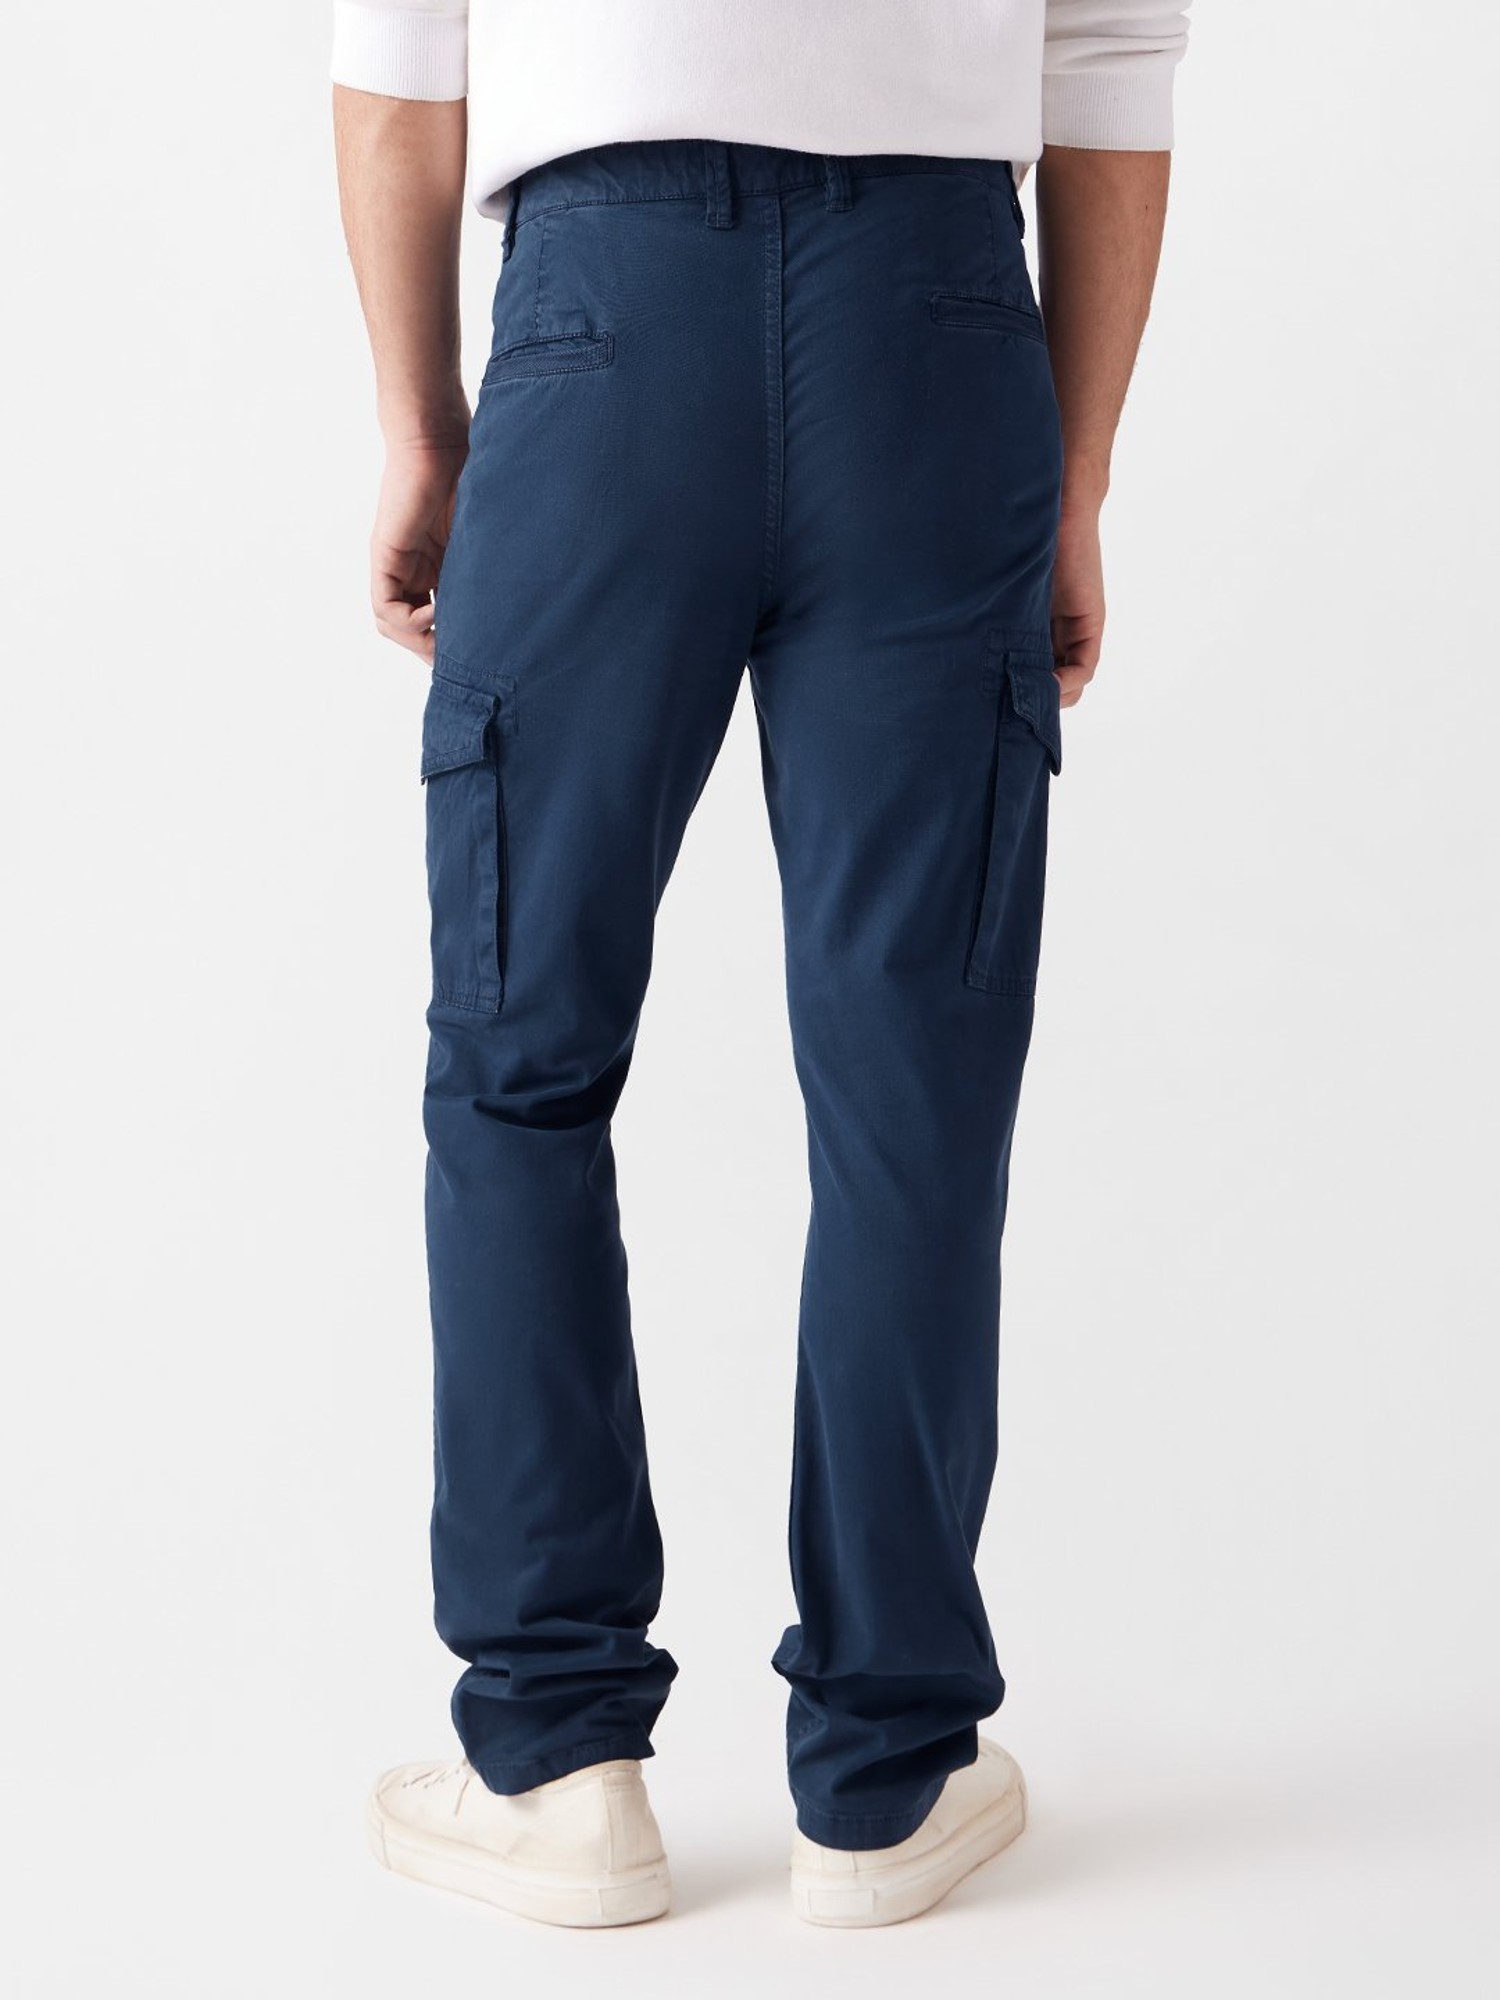 Manfinity Men Letter Patched Cargo Pants | SHEIN USA